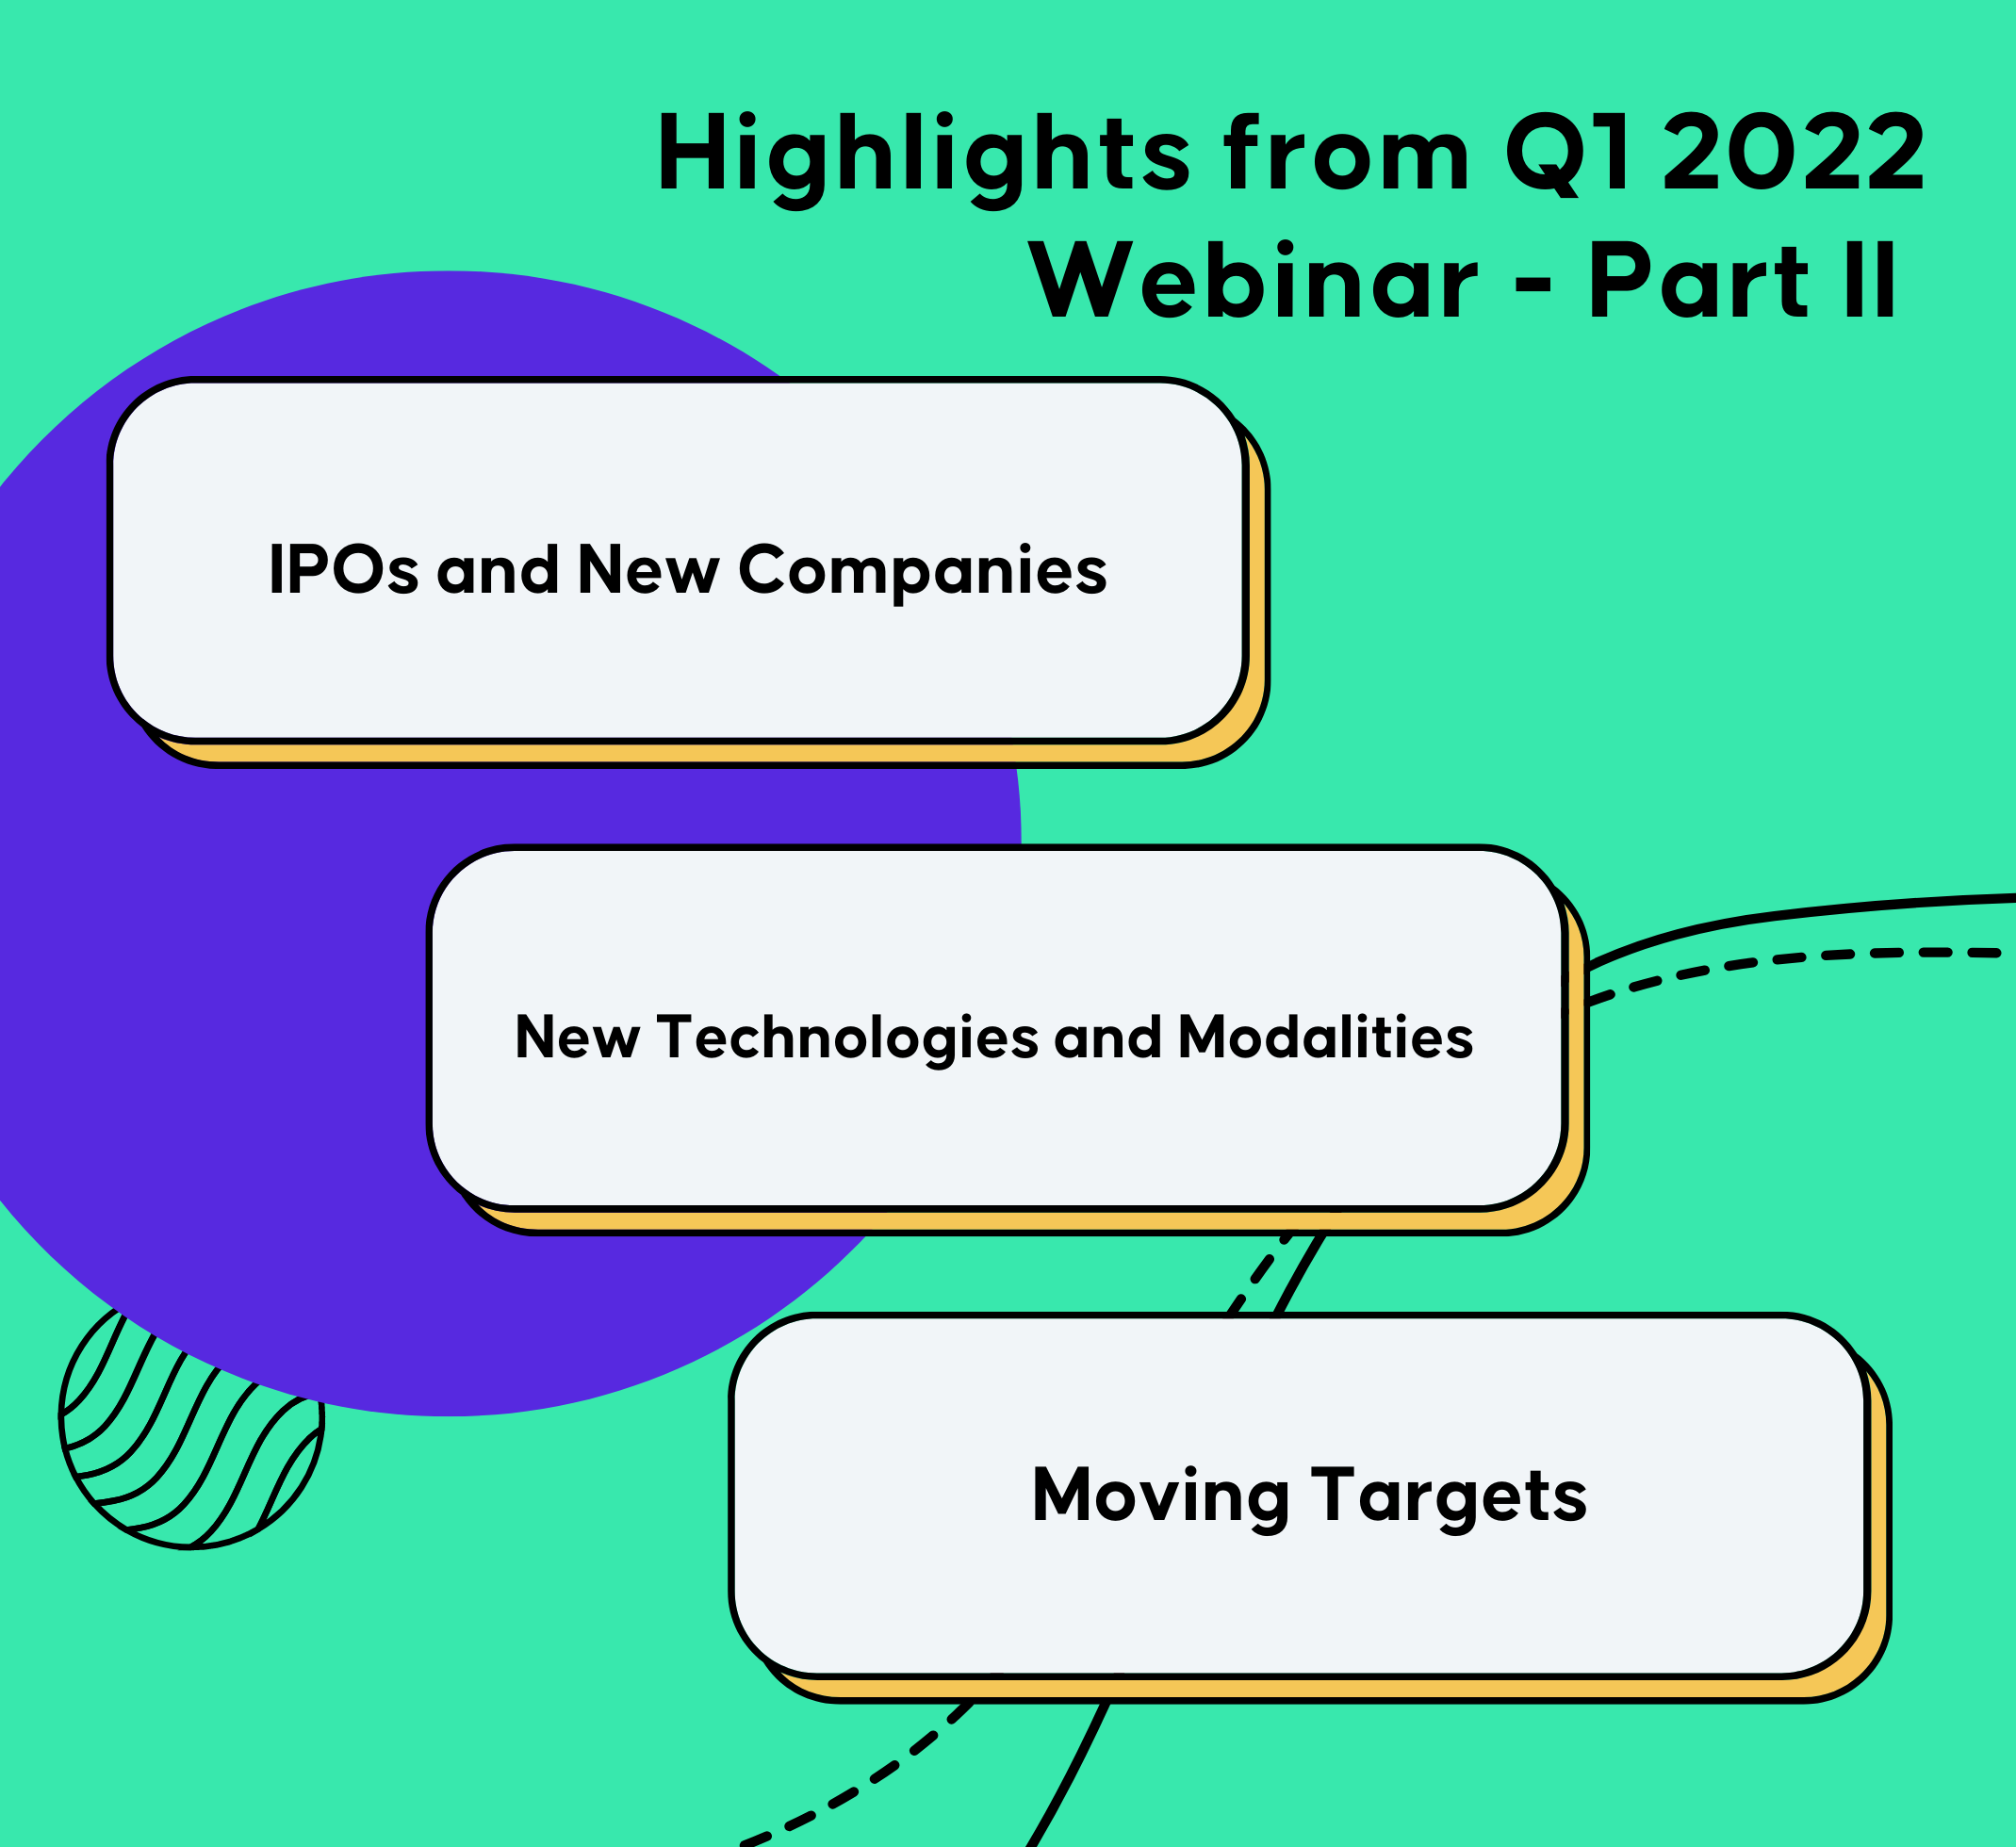 Highlights from Q1 2022 Webinar - Part II. IPOs and New Companies, New Technologies and Modalities, Moving Targets|Drug Hunter Webinar 2022 Q1 Part II|Highlights from Q1 2022 Webinar - Part II